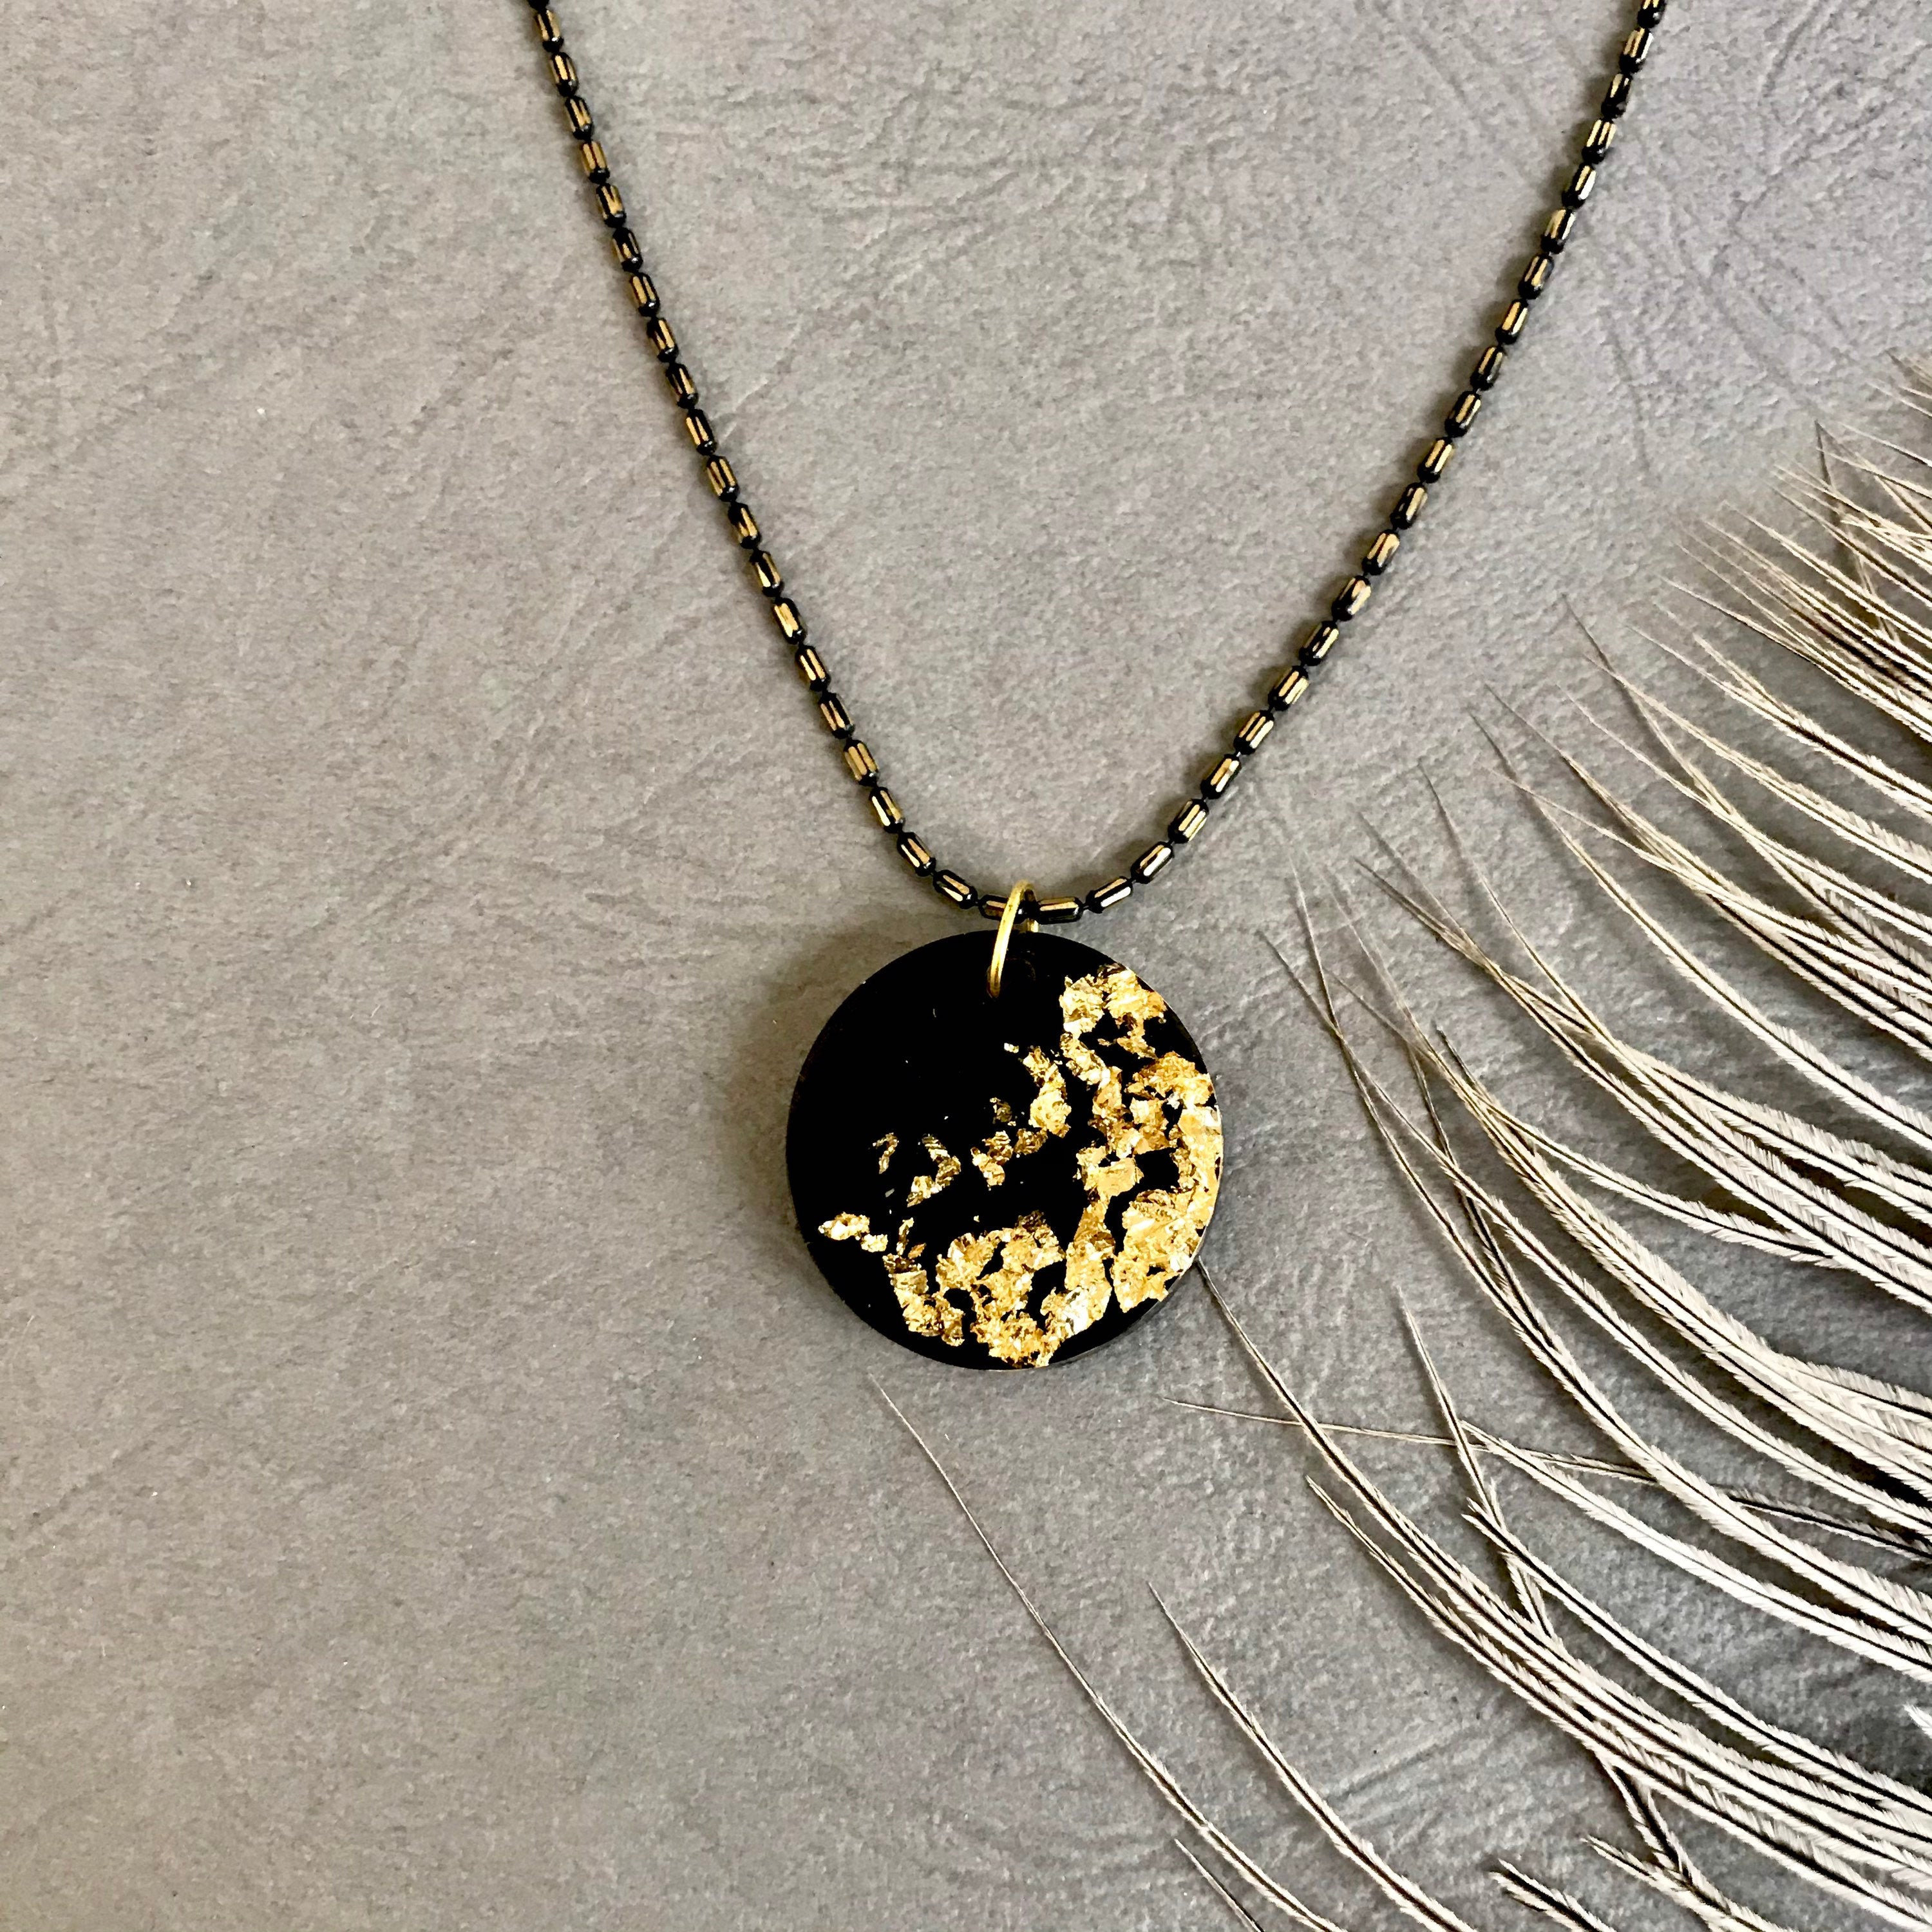 Gold Flake Resin Necklace, Resin Jewelry, Real Gold Necklace, Real Gold  Flakes, Resin Pendant, Gold Leaf Necklace, Resin Sphere Necklace 